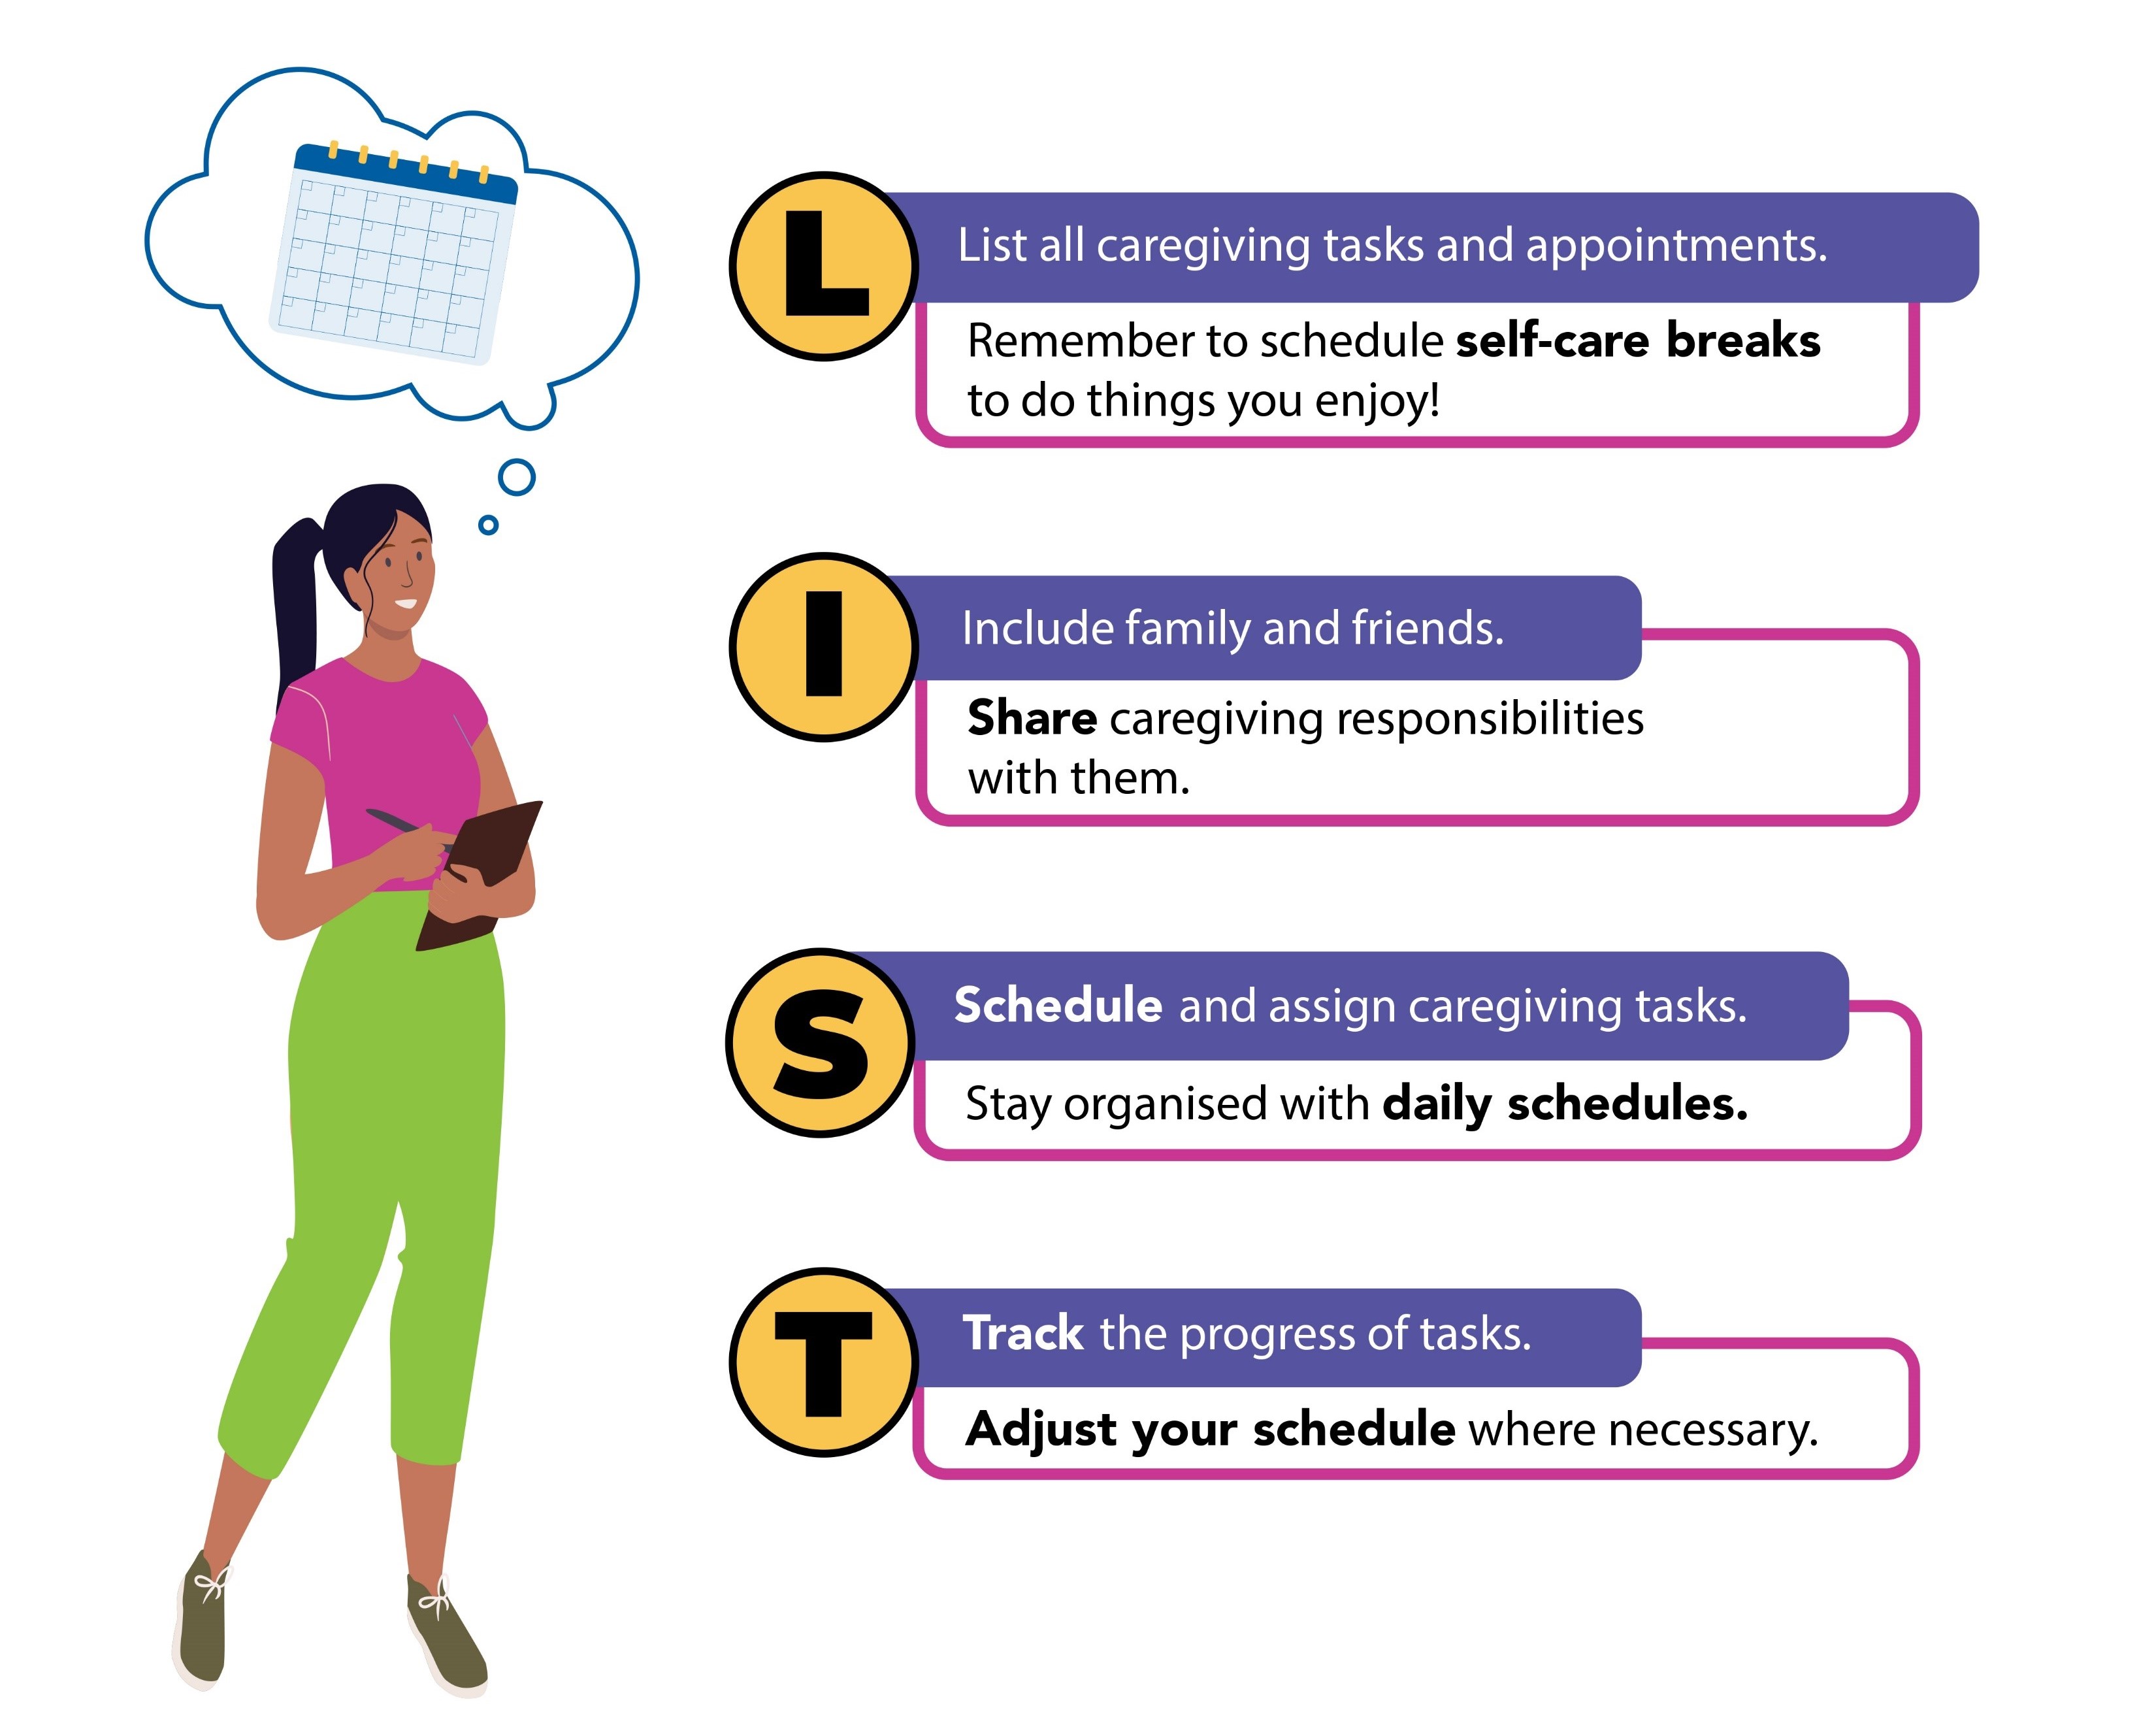 The infographic encourages caregivers to list out their daily tasks using the L.I.S.T tip. L: List all caregiving tasks and appointments.  I: Include family and friends. S: Schedule and assign caregiving tasks. T: Adjust your schedule where necessary.